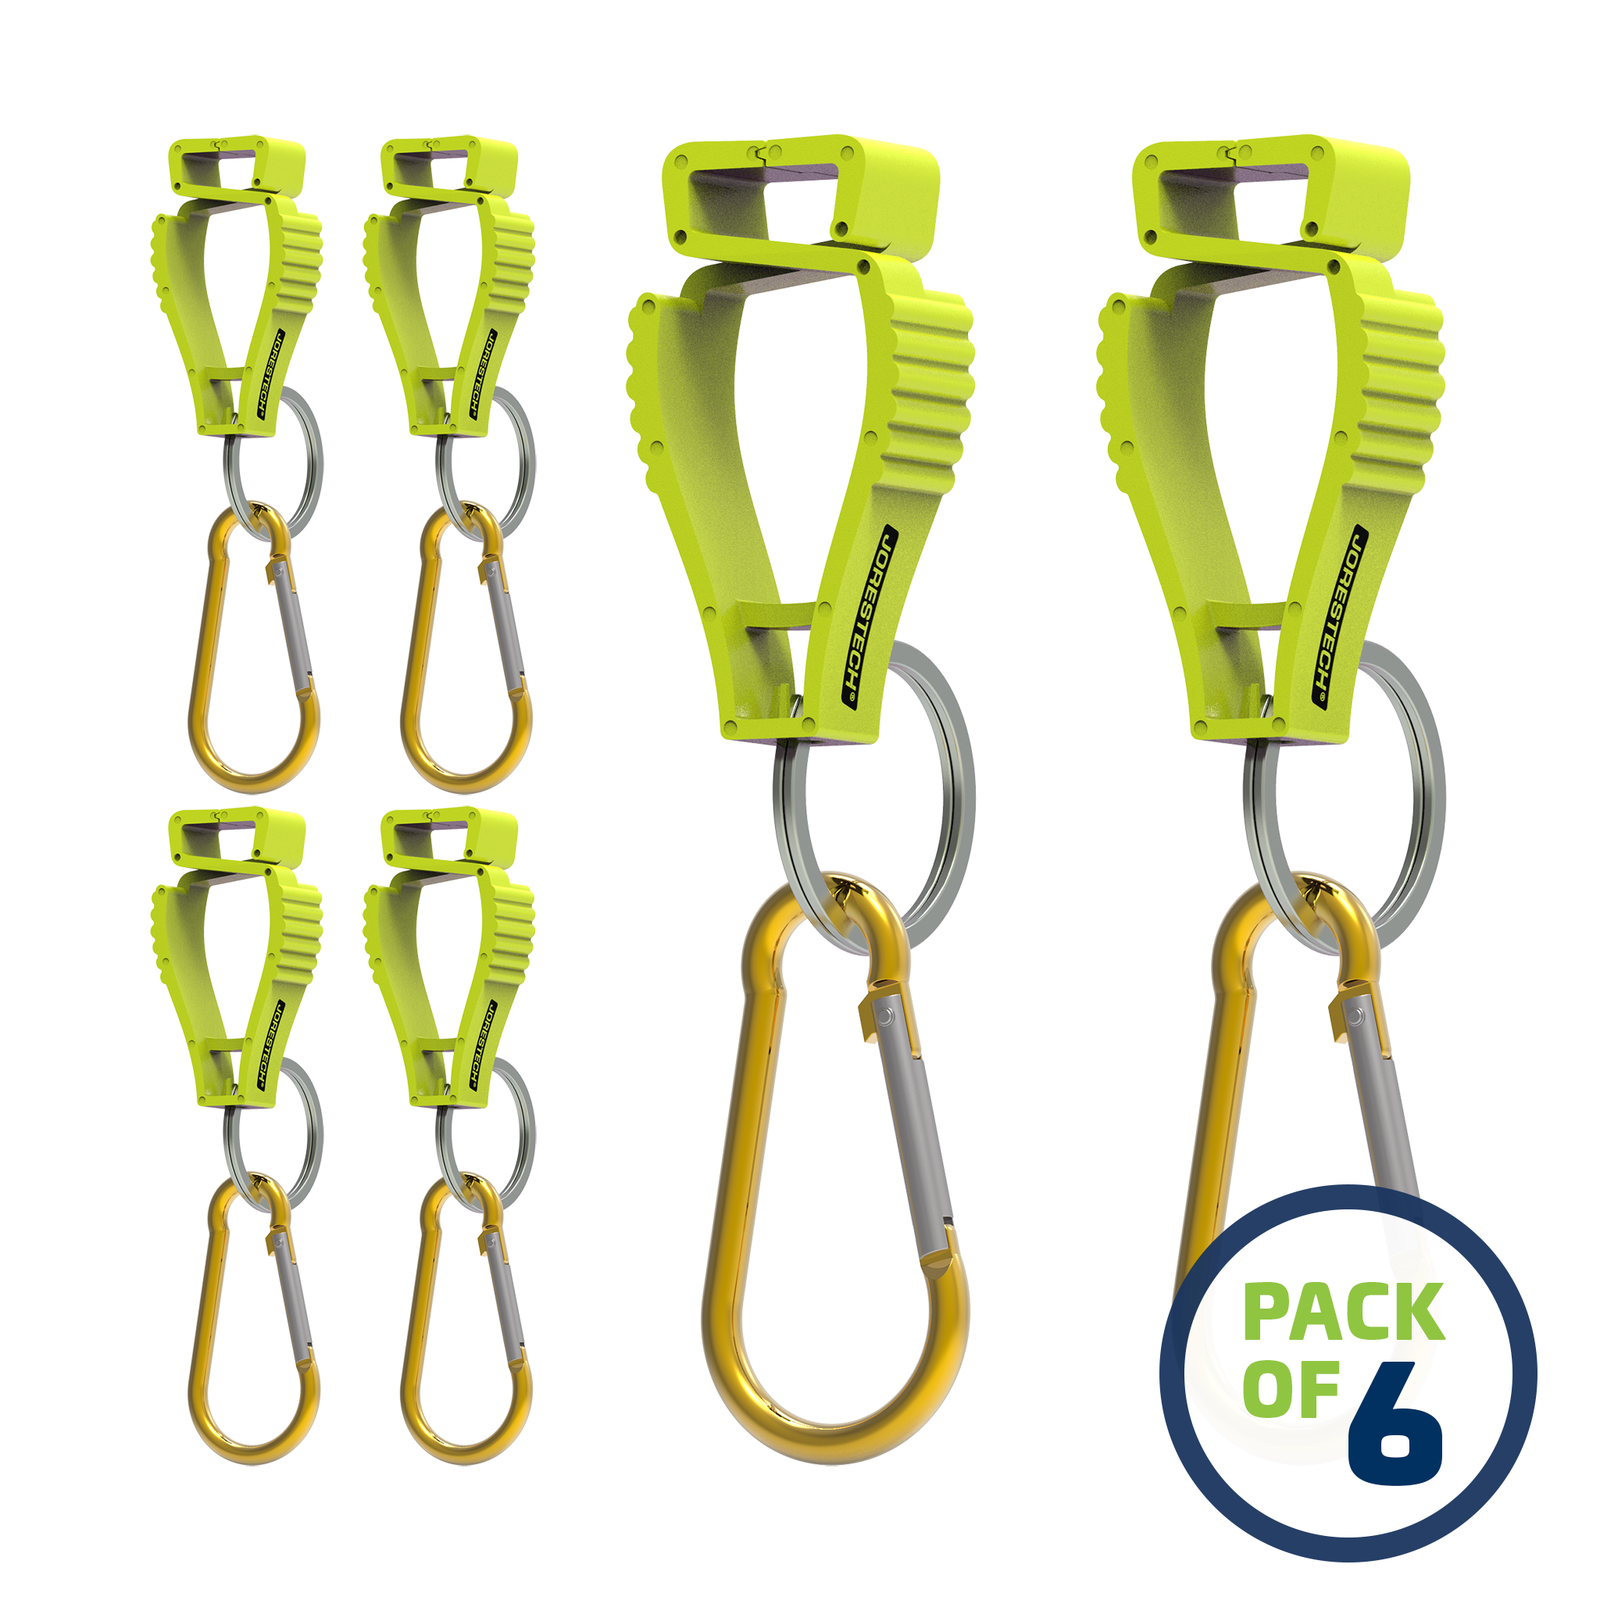 image of a pack of 6 Lime JORESTECH glove clip safety holders with carabiner over white background